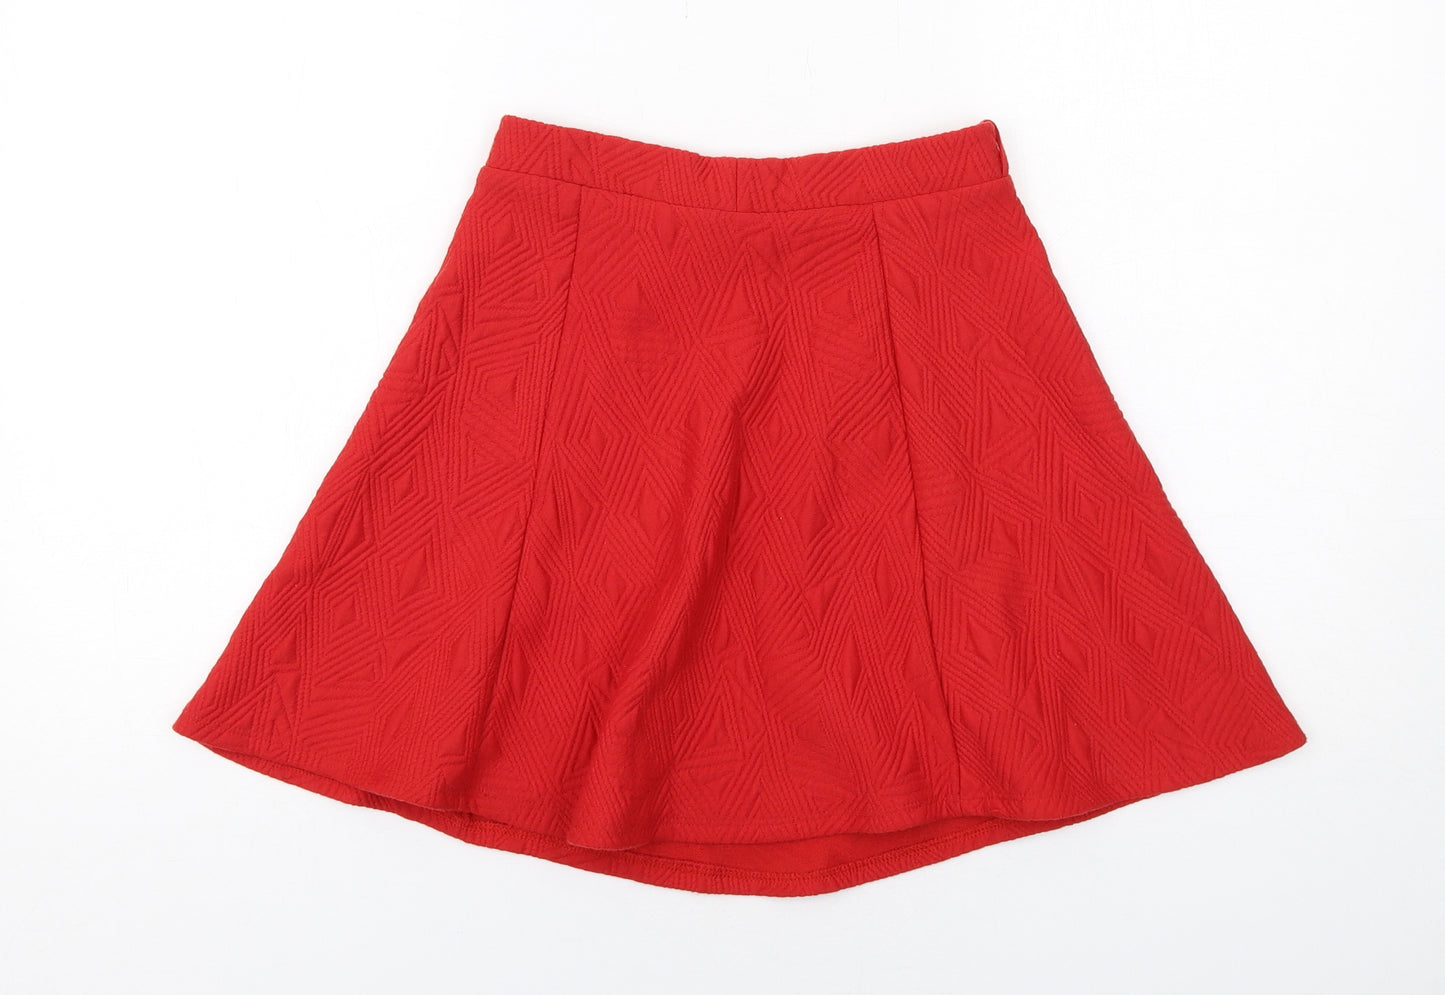 River Island Womens Red Geometric Polyester Swing Skirt Size 8